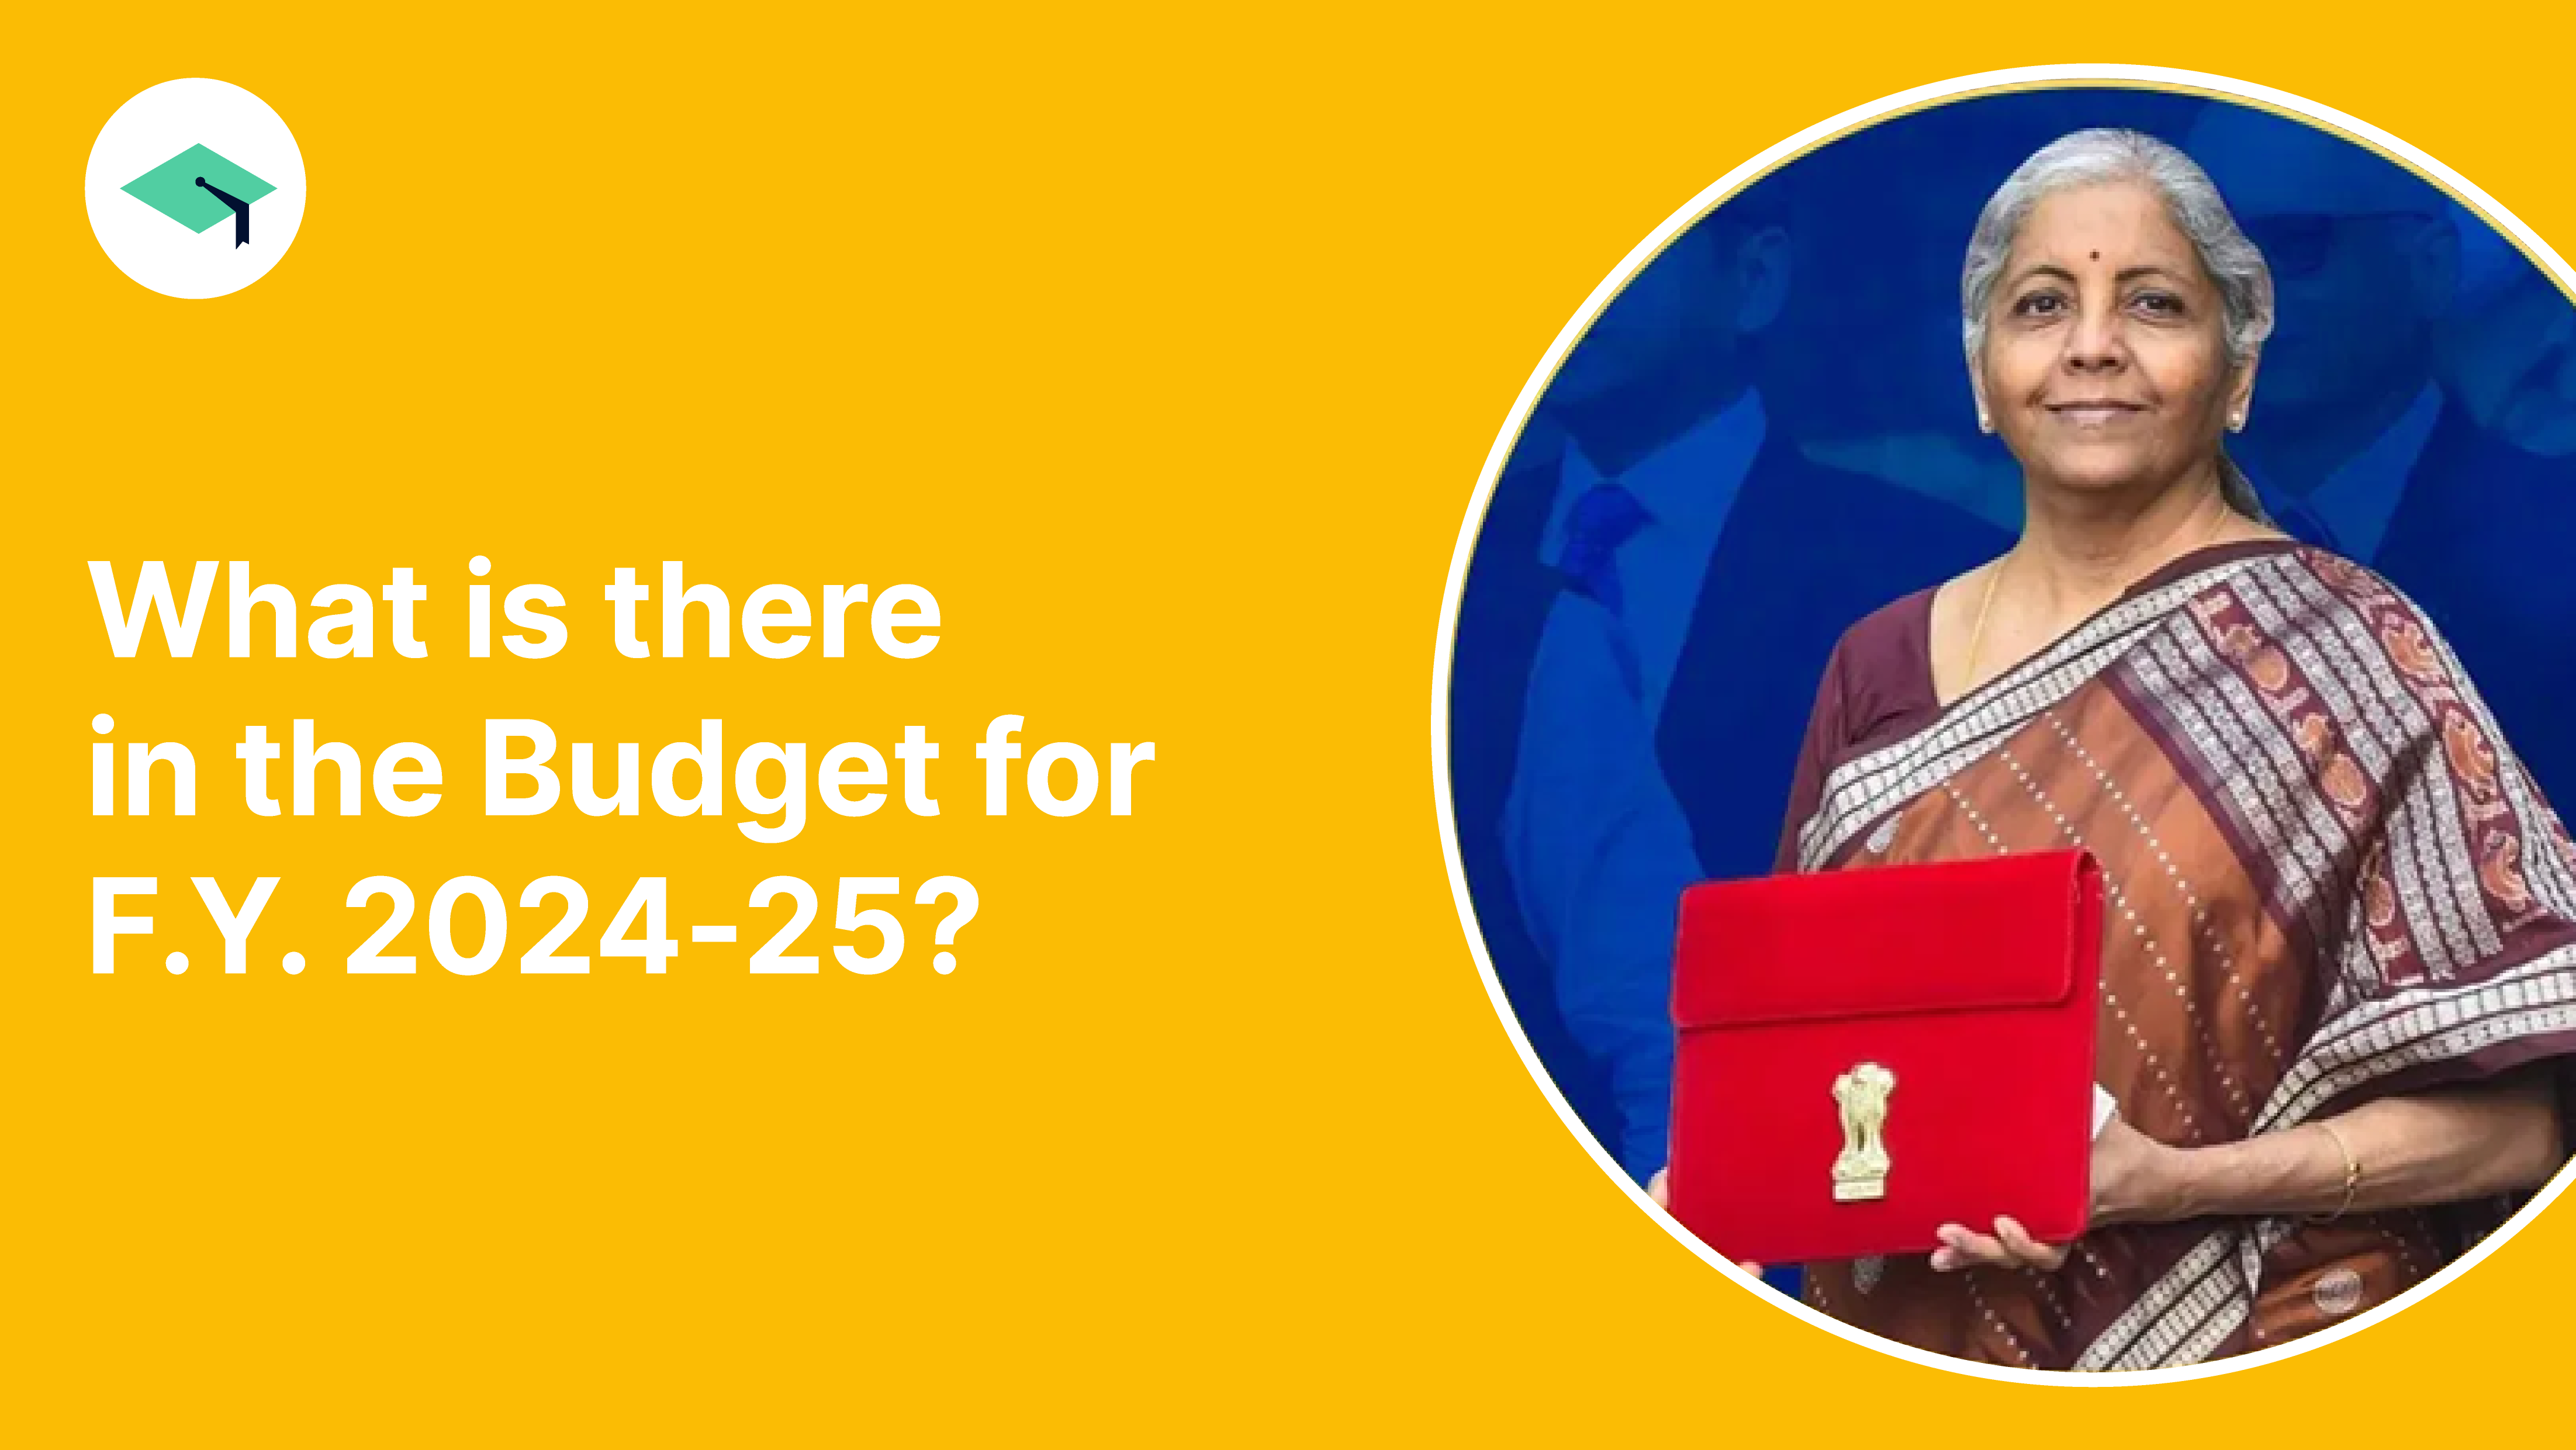 What is there in the Budget for F.Y. 2024-25? 